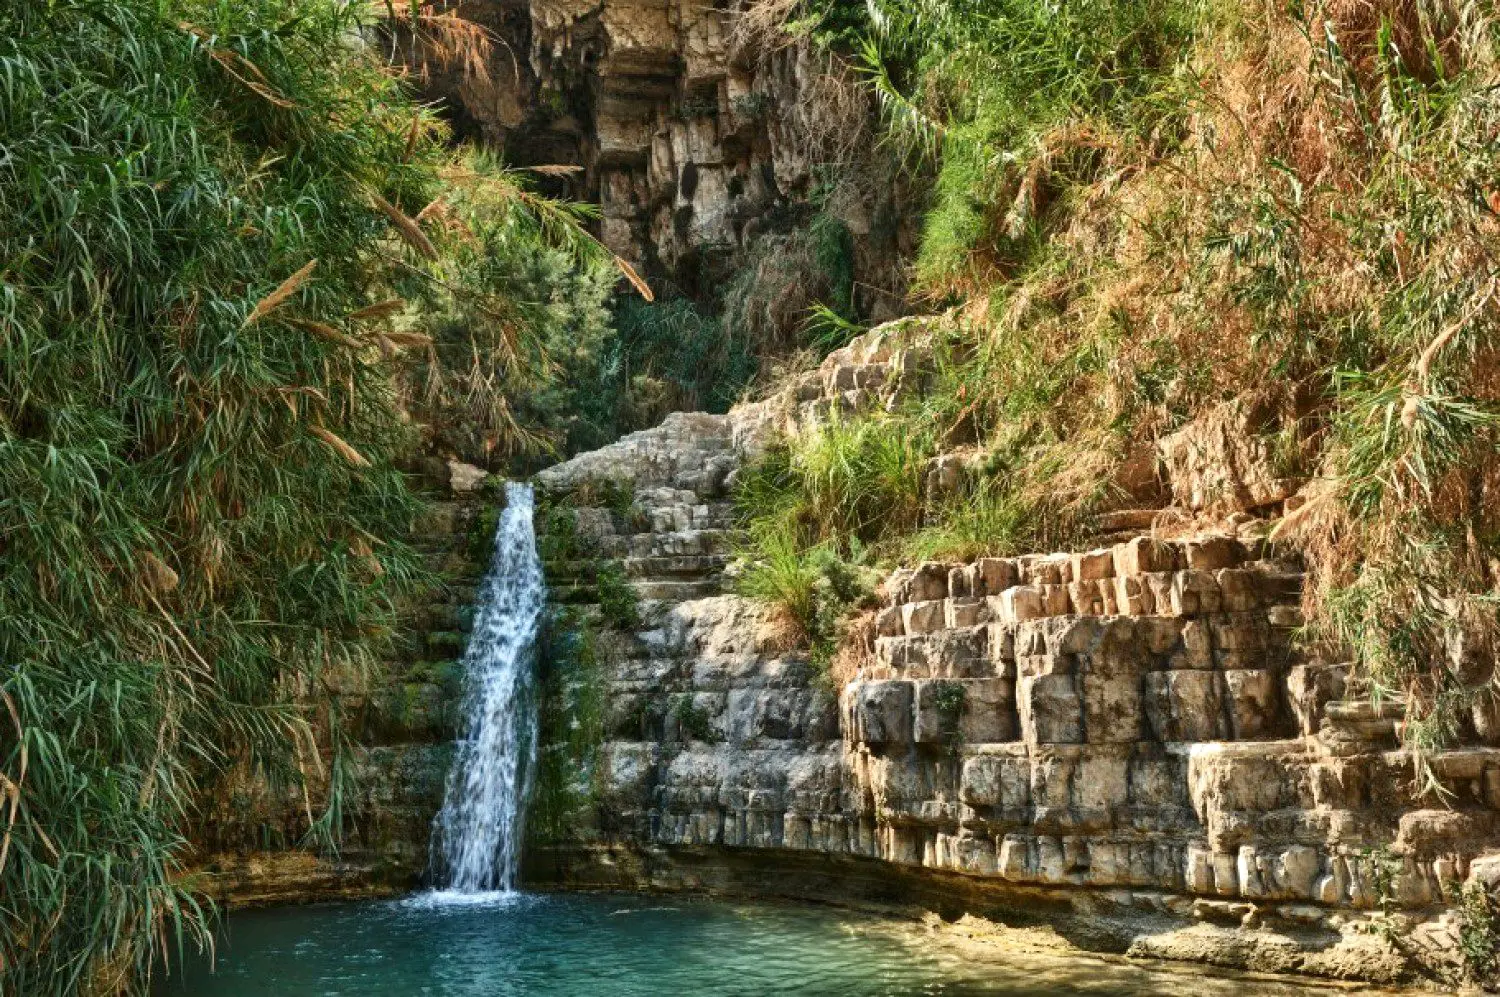 Tourist's guide to Ein Gedi Nature Reserve in Israel - Oasis in the desert